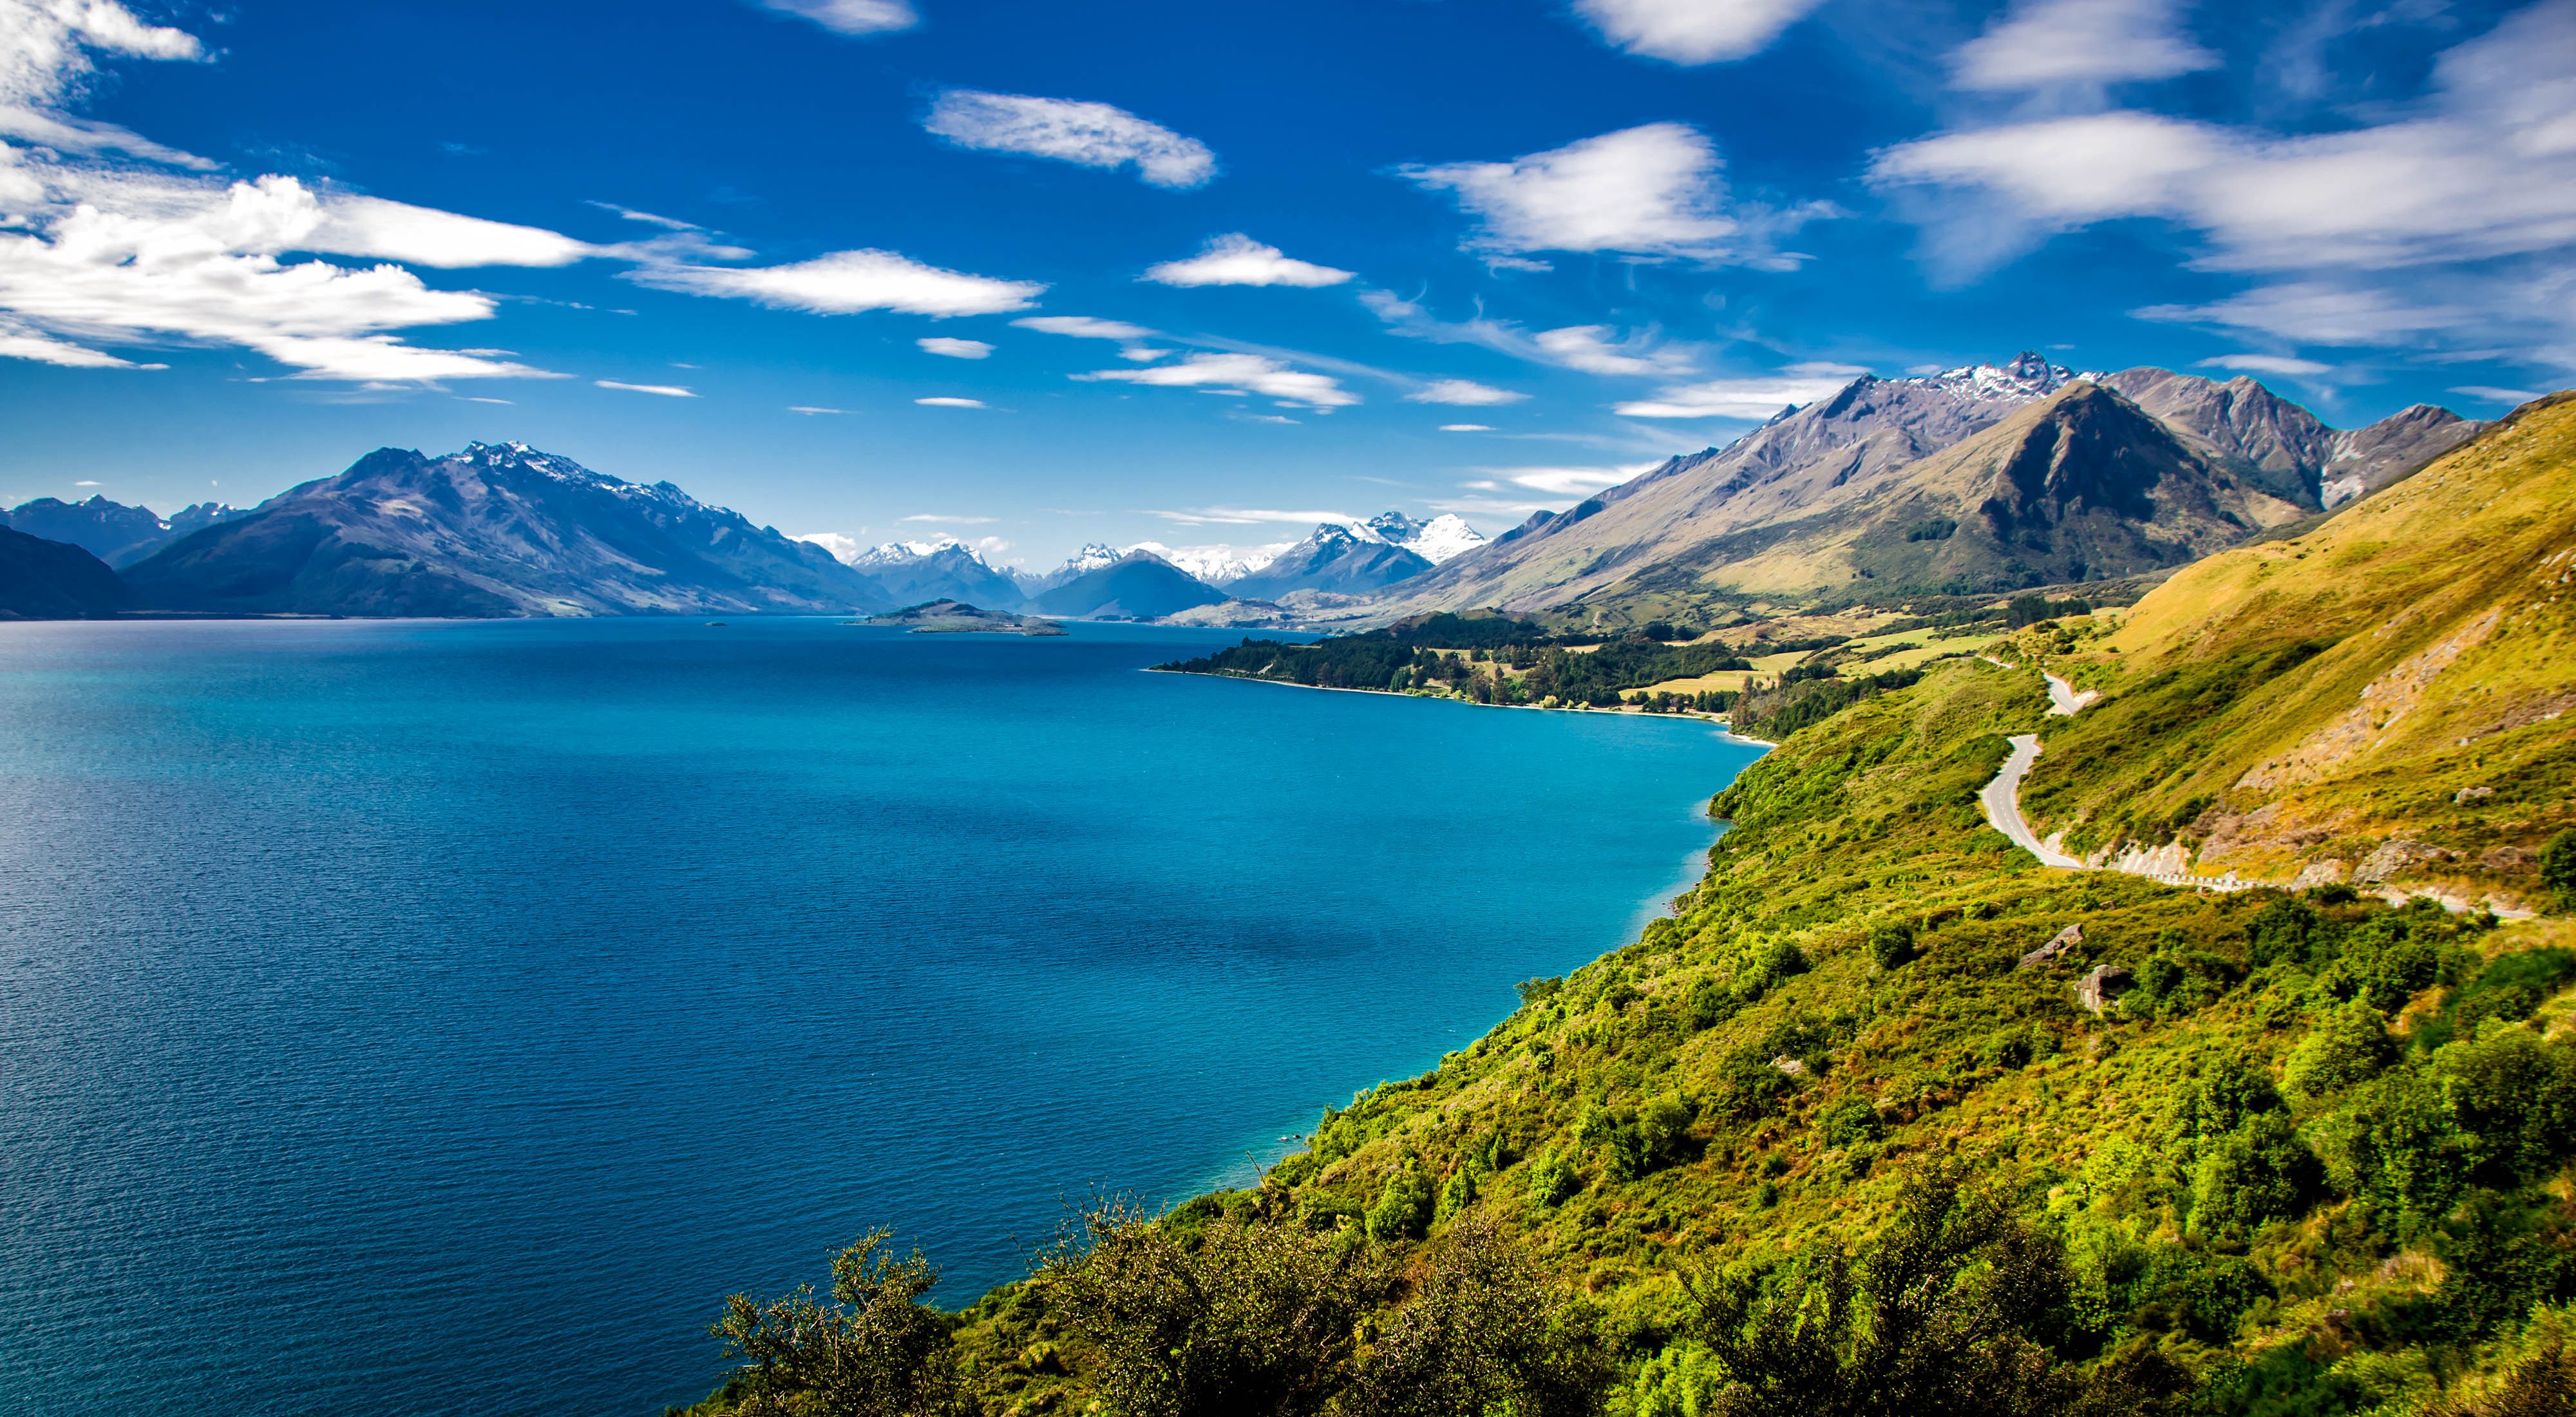 High-altitude view looking across the bright blue waters of Lake Wakatipu and the road from Queenstown to Glenorchy in New Zealand; southern Alps mountains are in the distance.